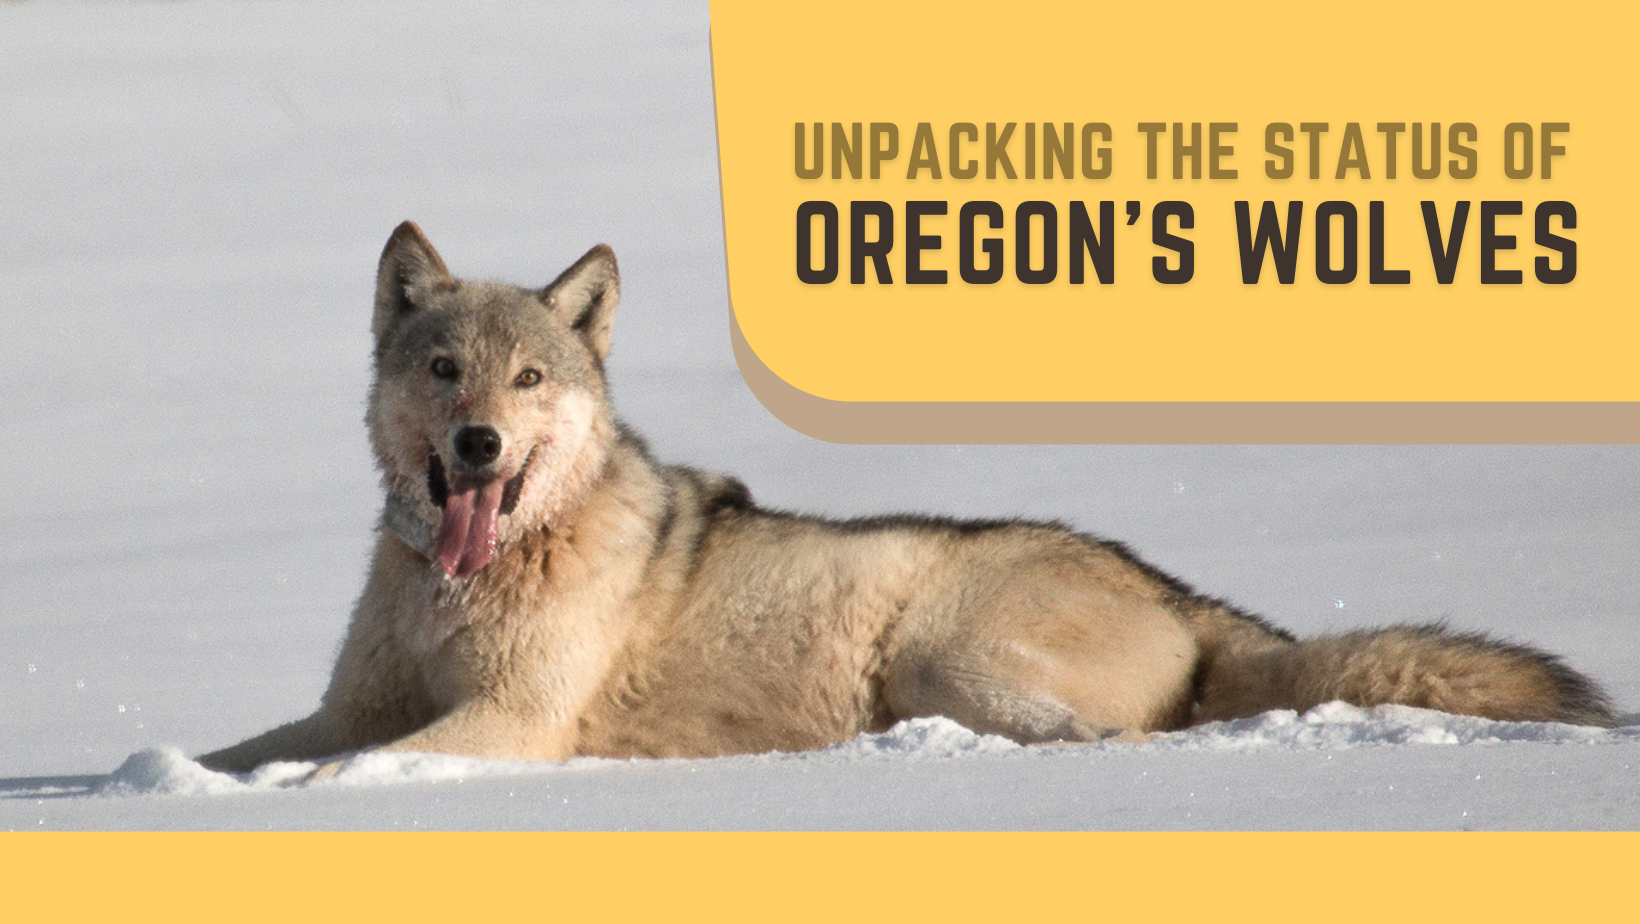 Webcast: Unpacking the Status of Oregon's Wolves